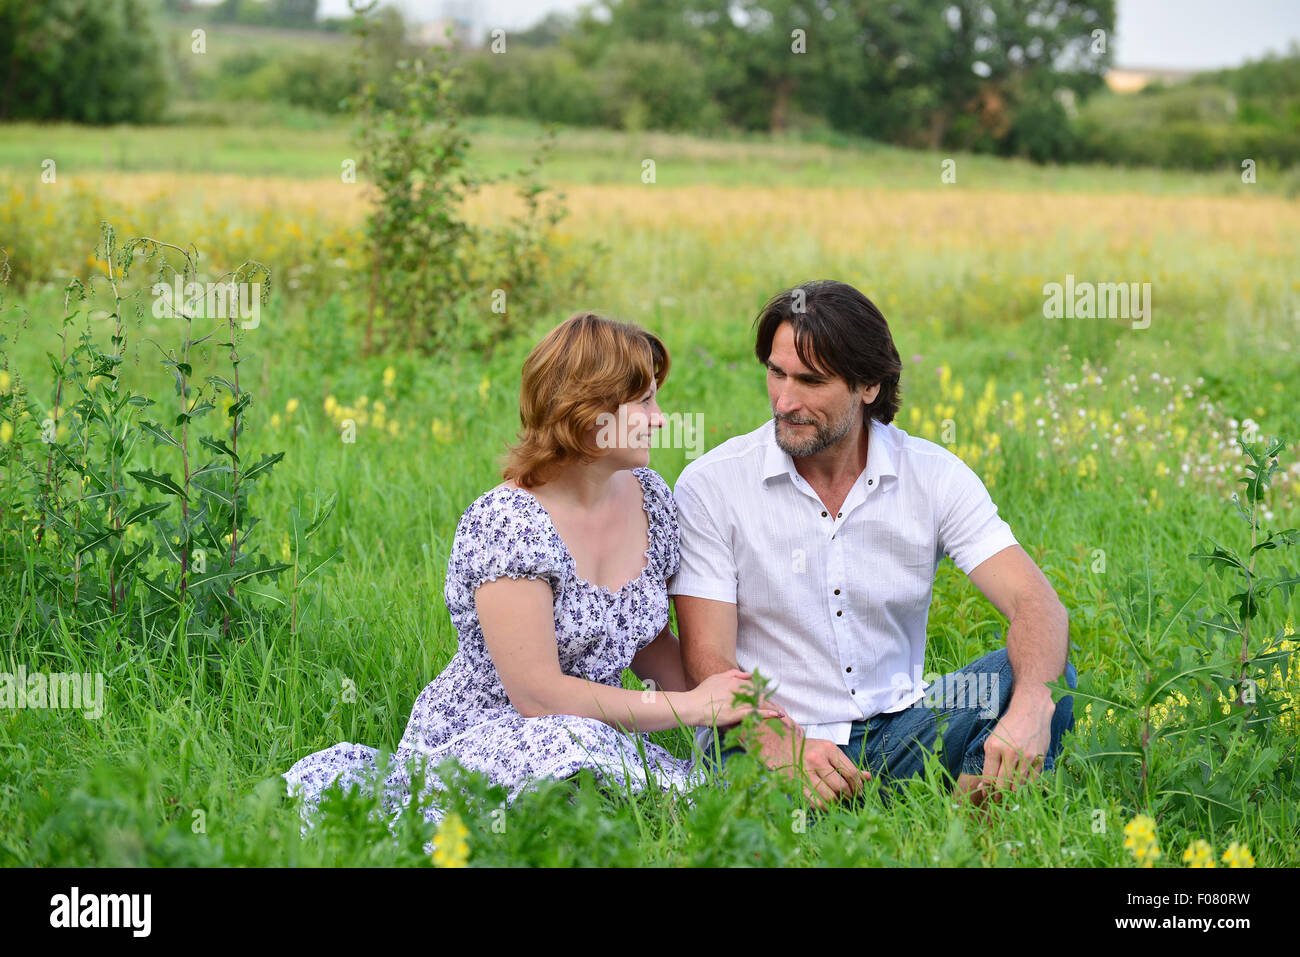 A Loving couple relaxing on a meadow Stock Photo